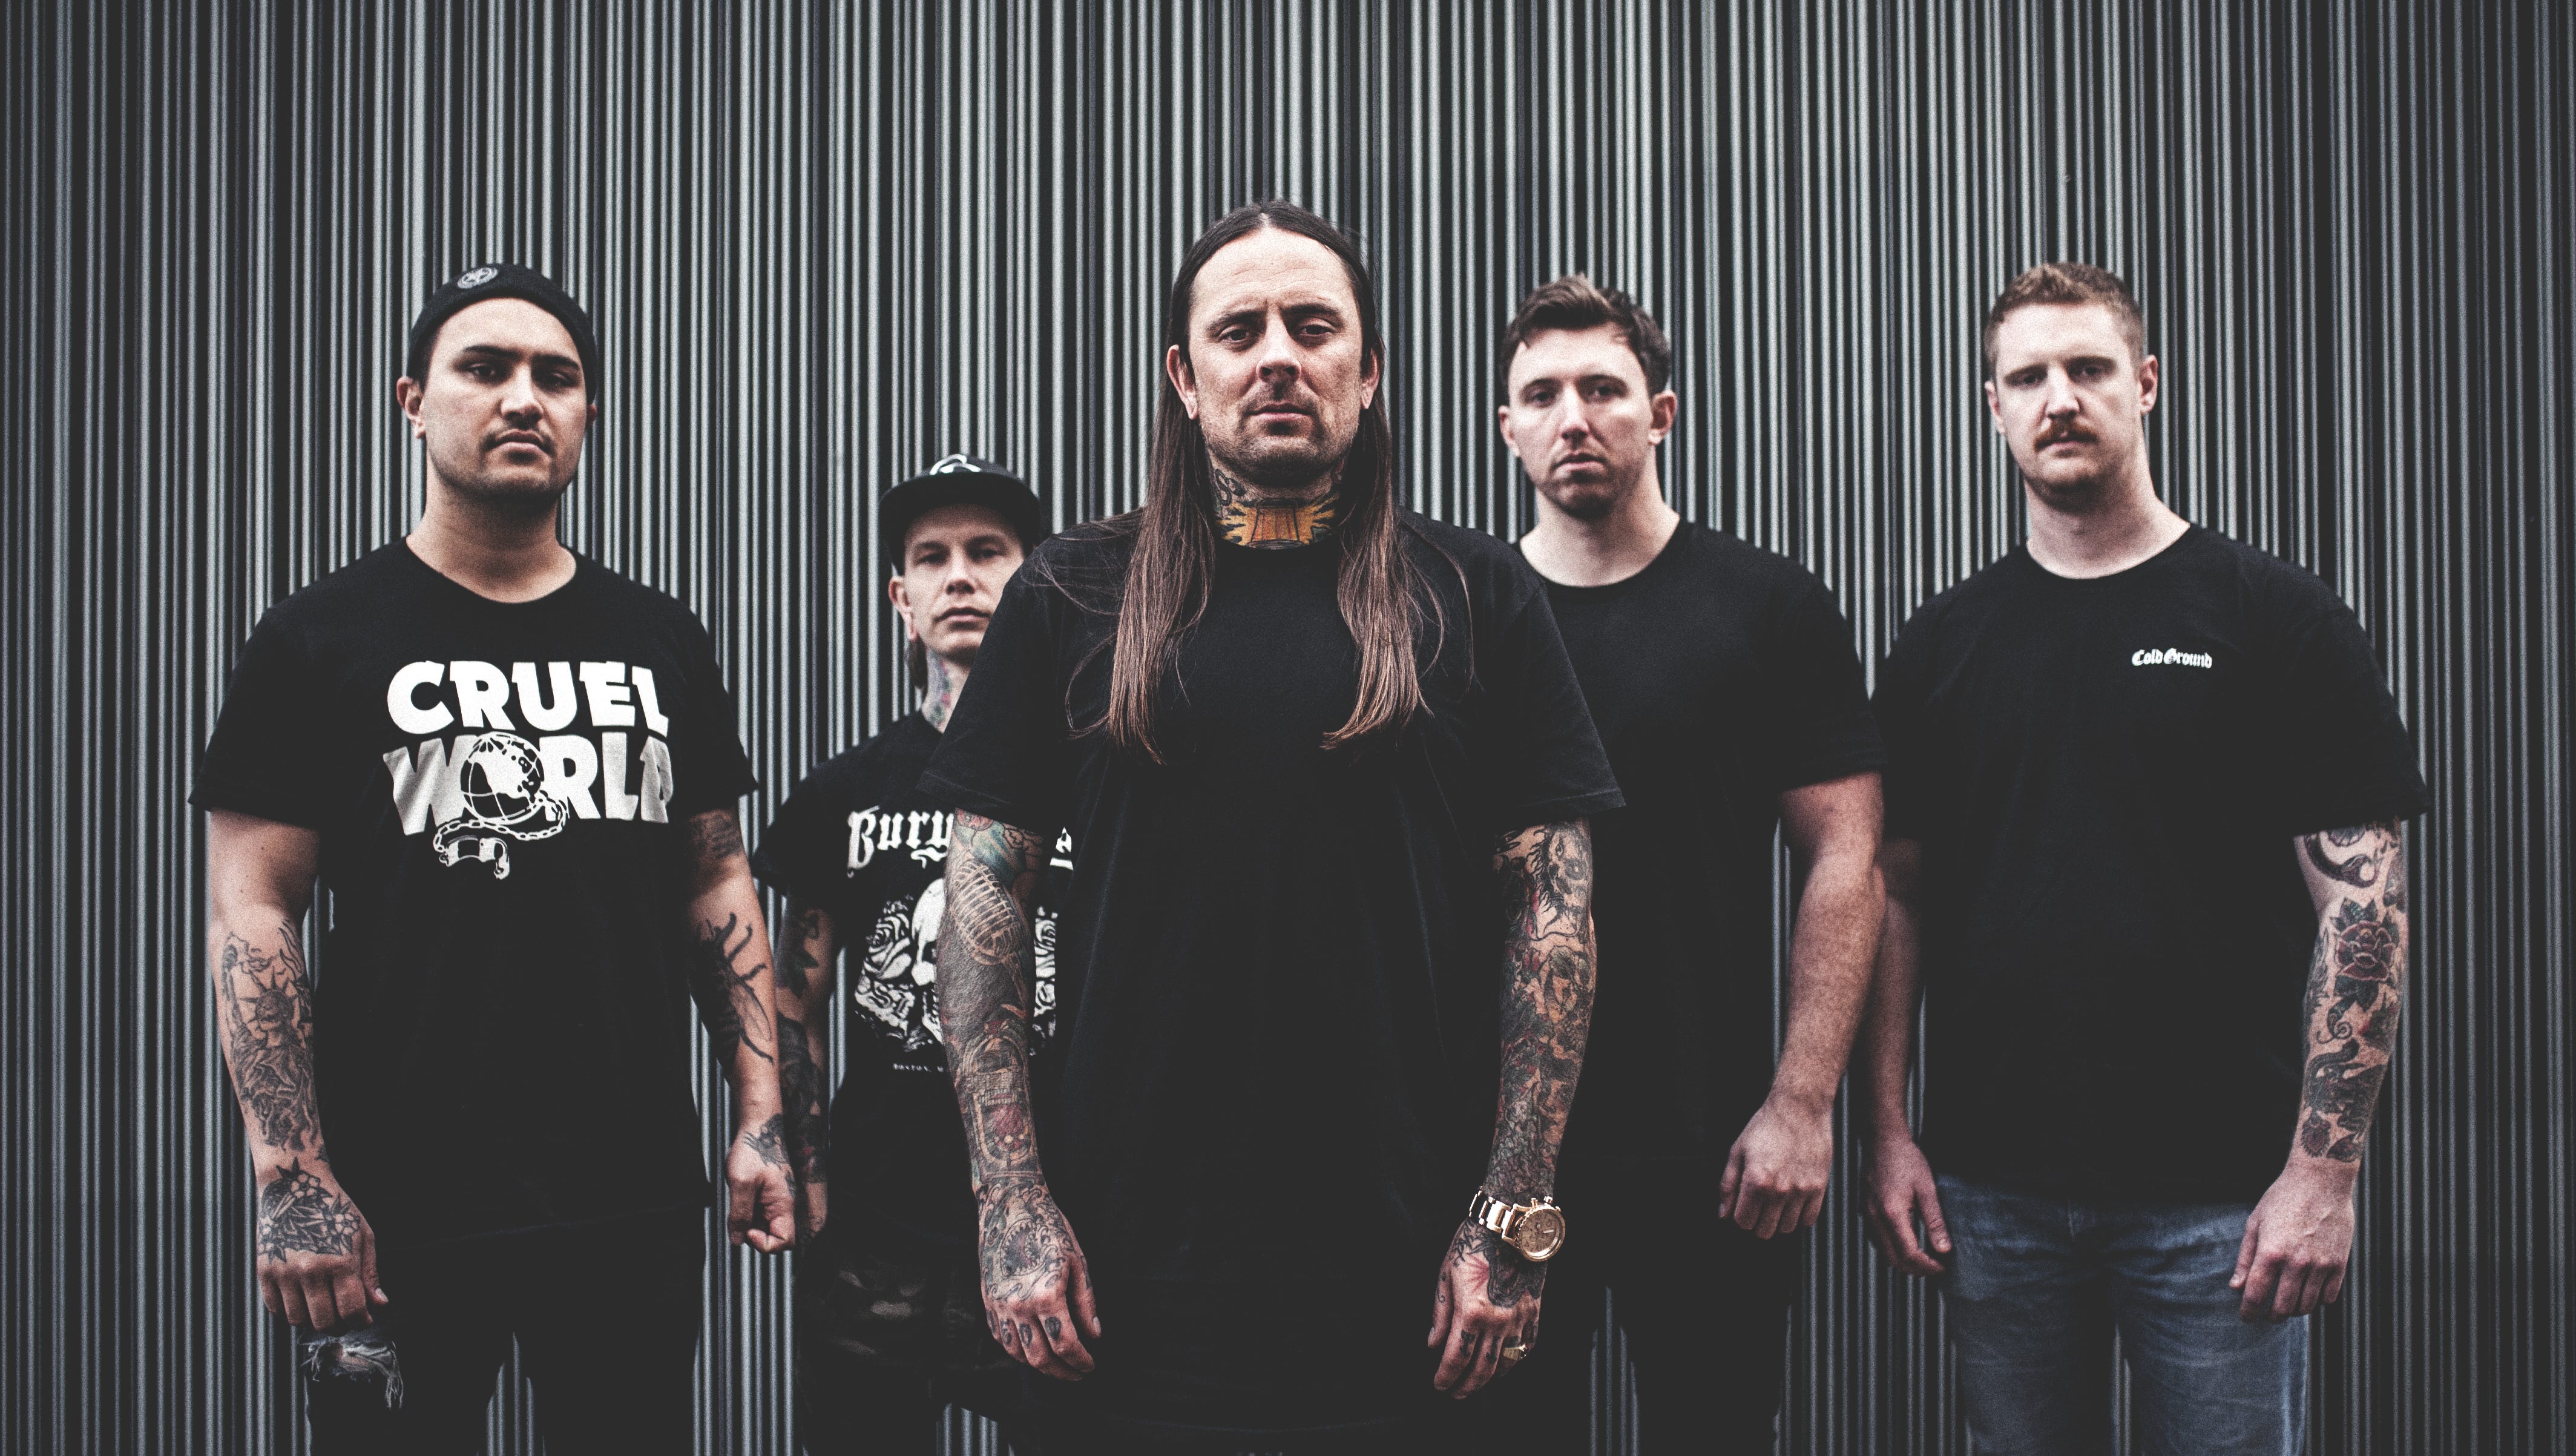 Thy Art Is Murder set to perfom in El Paso on Sunday at Tricky Falls